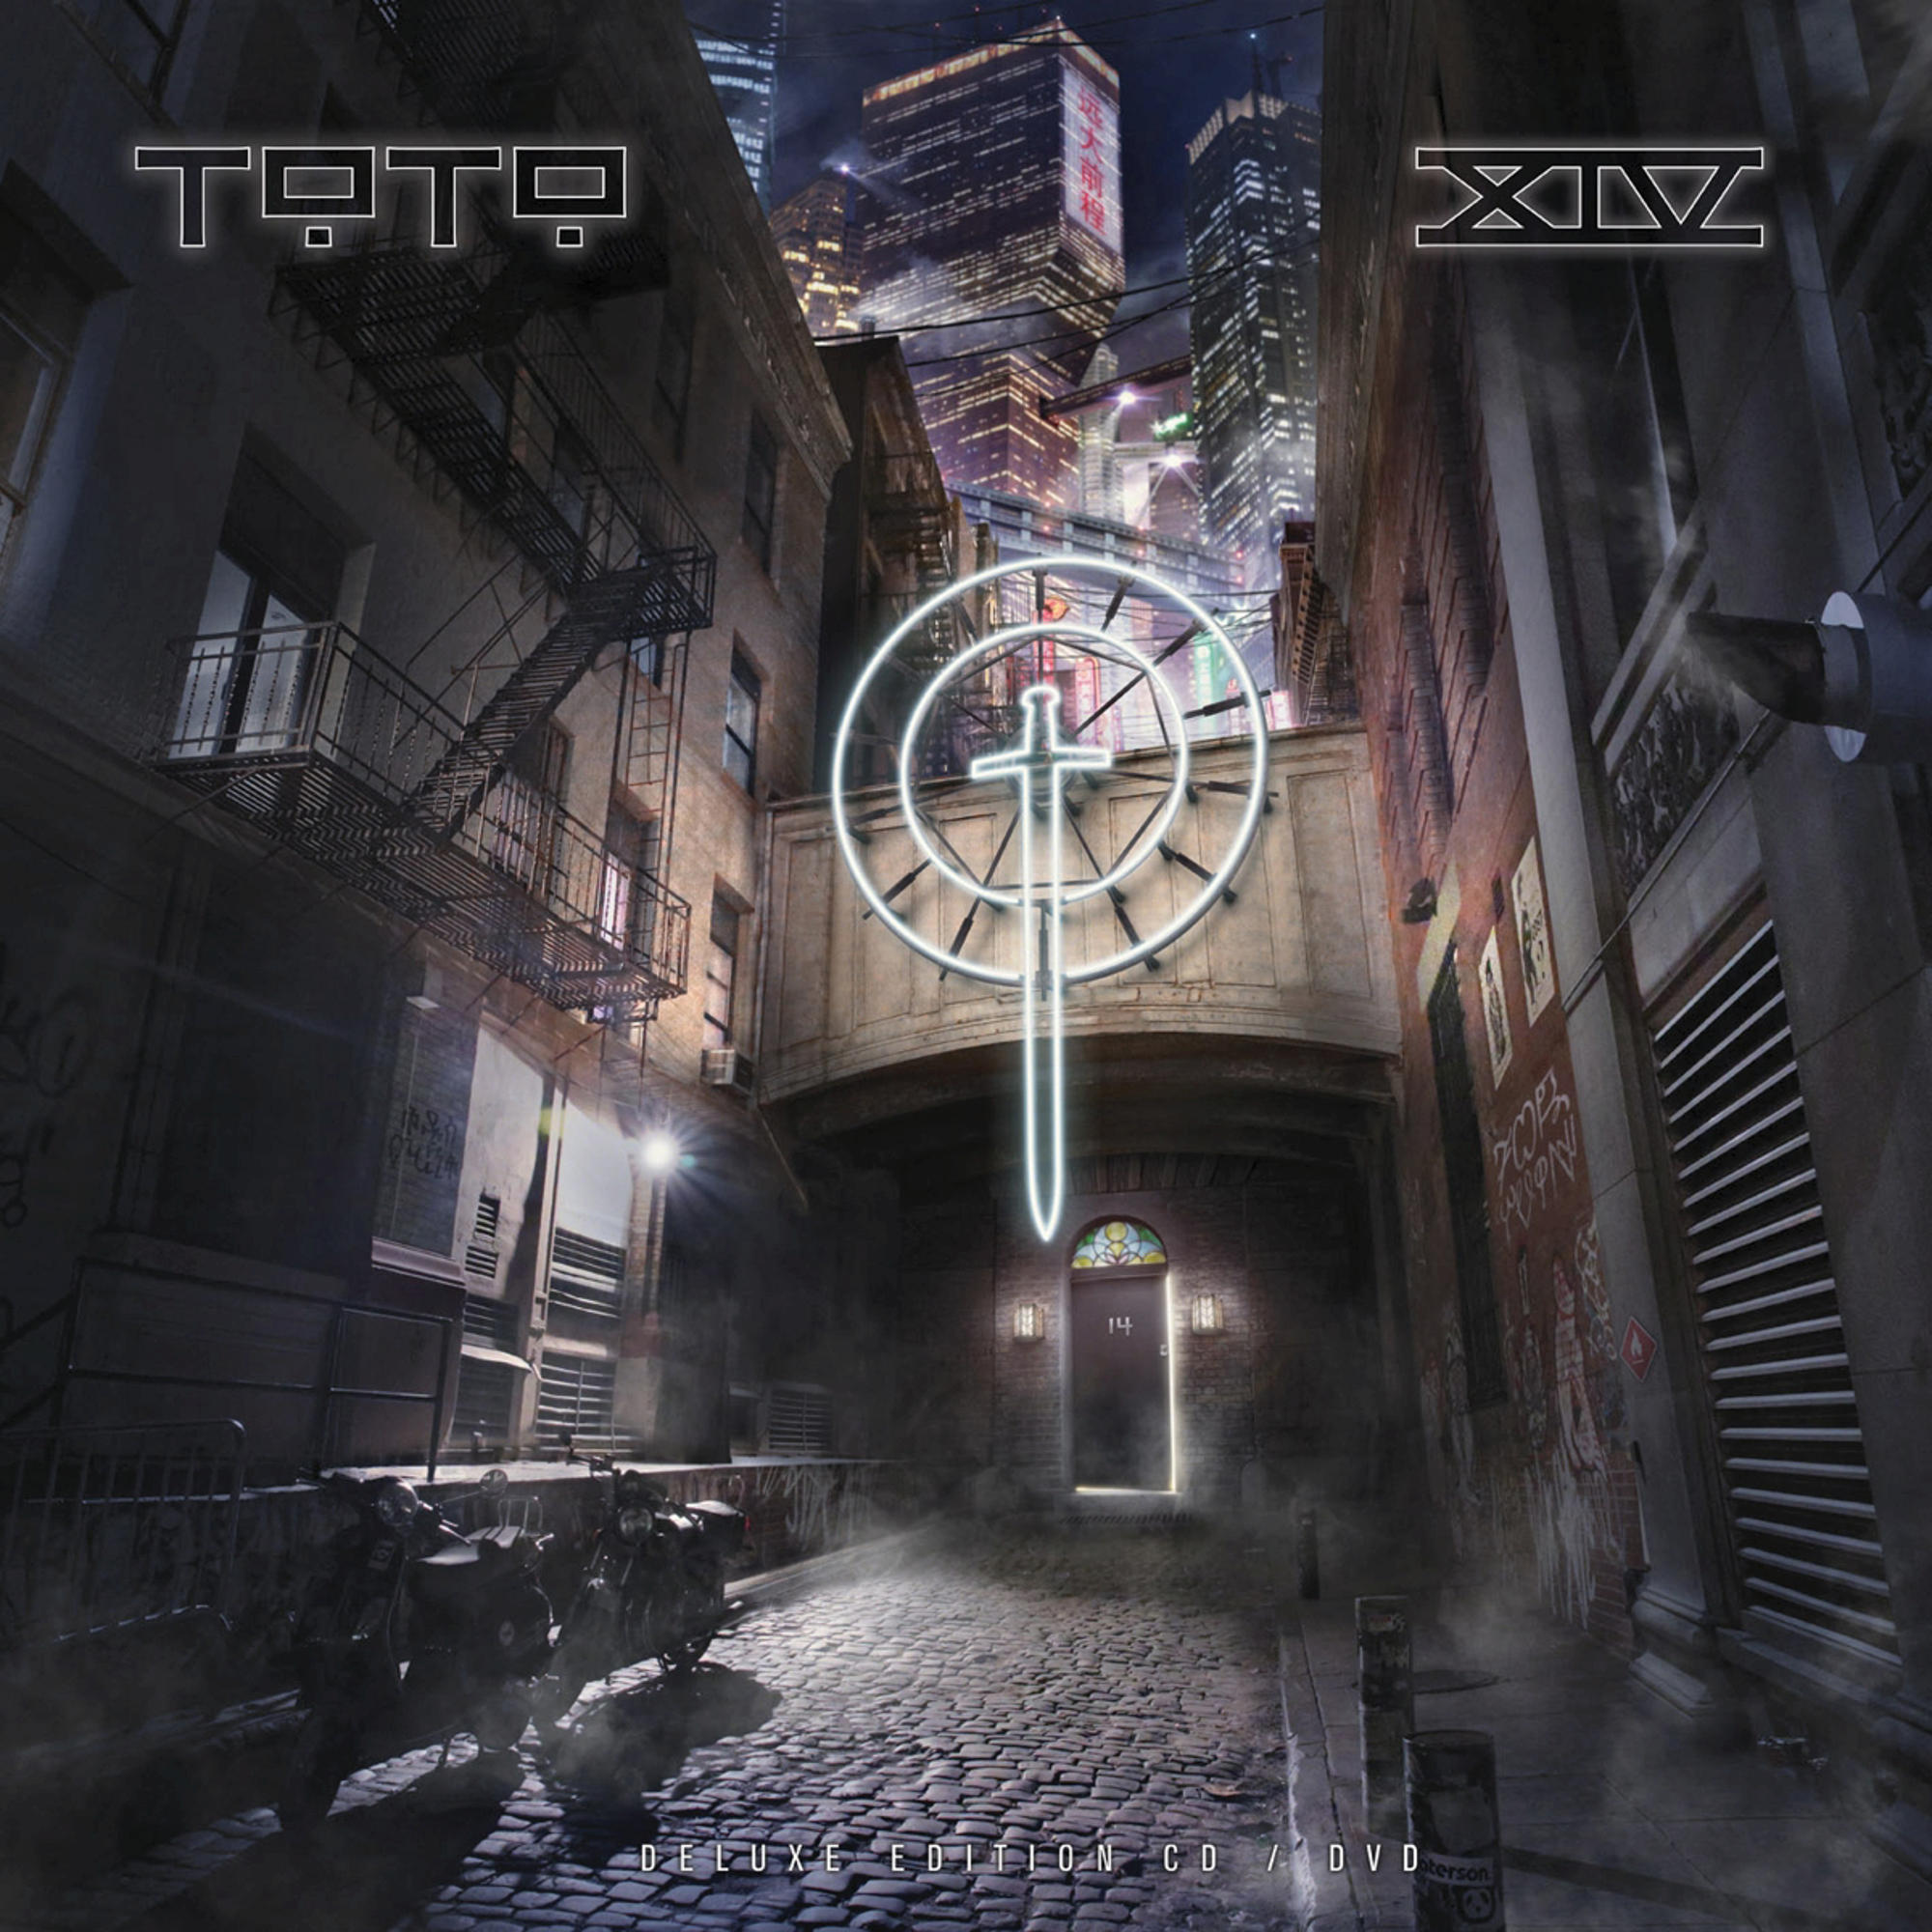 Toto - Toto XIV - DVD (Limited Edition) Ecolbook (CD Video) 